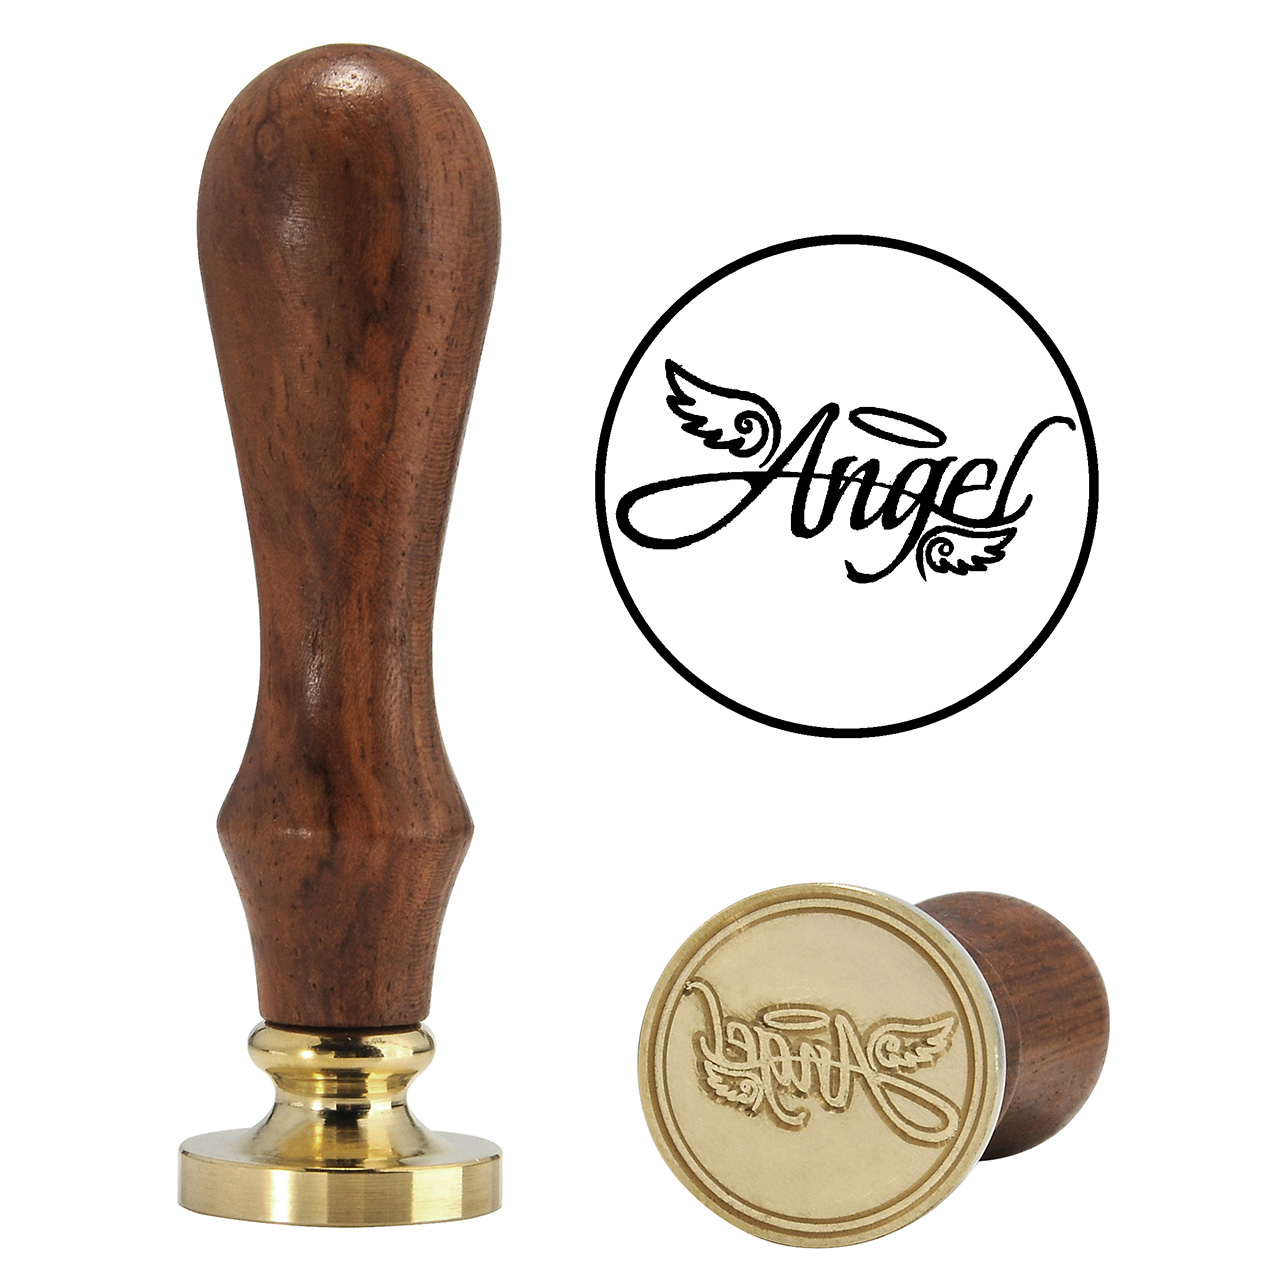 Secret Angel Wax Stamp, Yoption Vintage Retro Romantic Angel Sealing Wax Seal Stamp, Great for Embellishment of Cards Envelopes, Invitations, Wine Packages, Gift Idea (Angel)